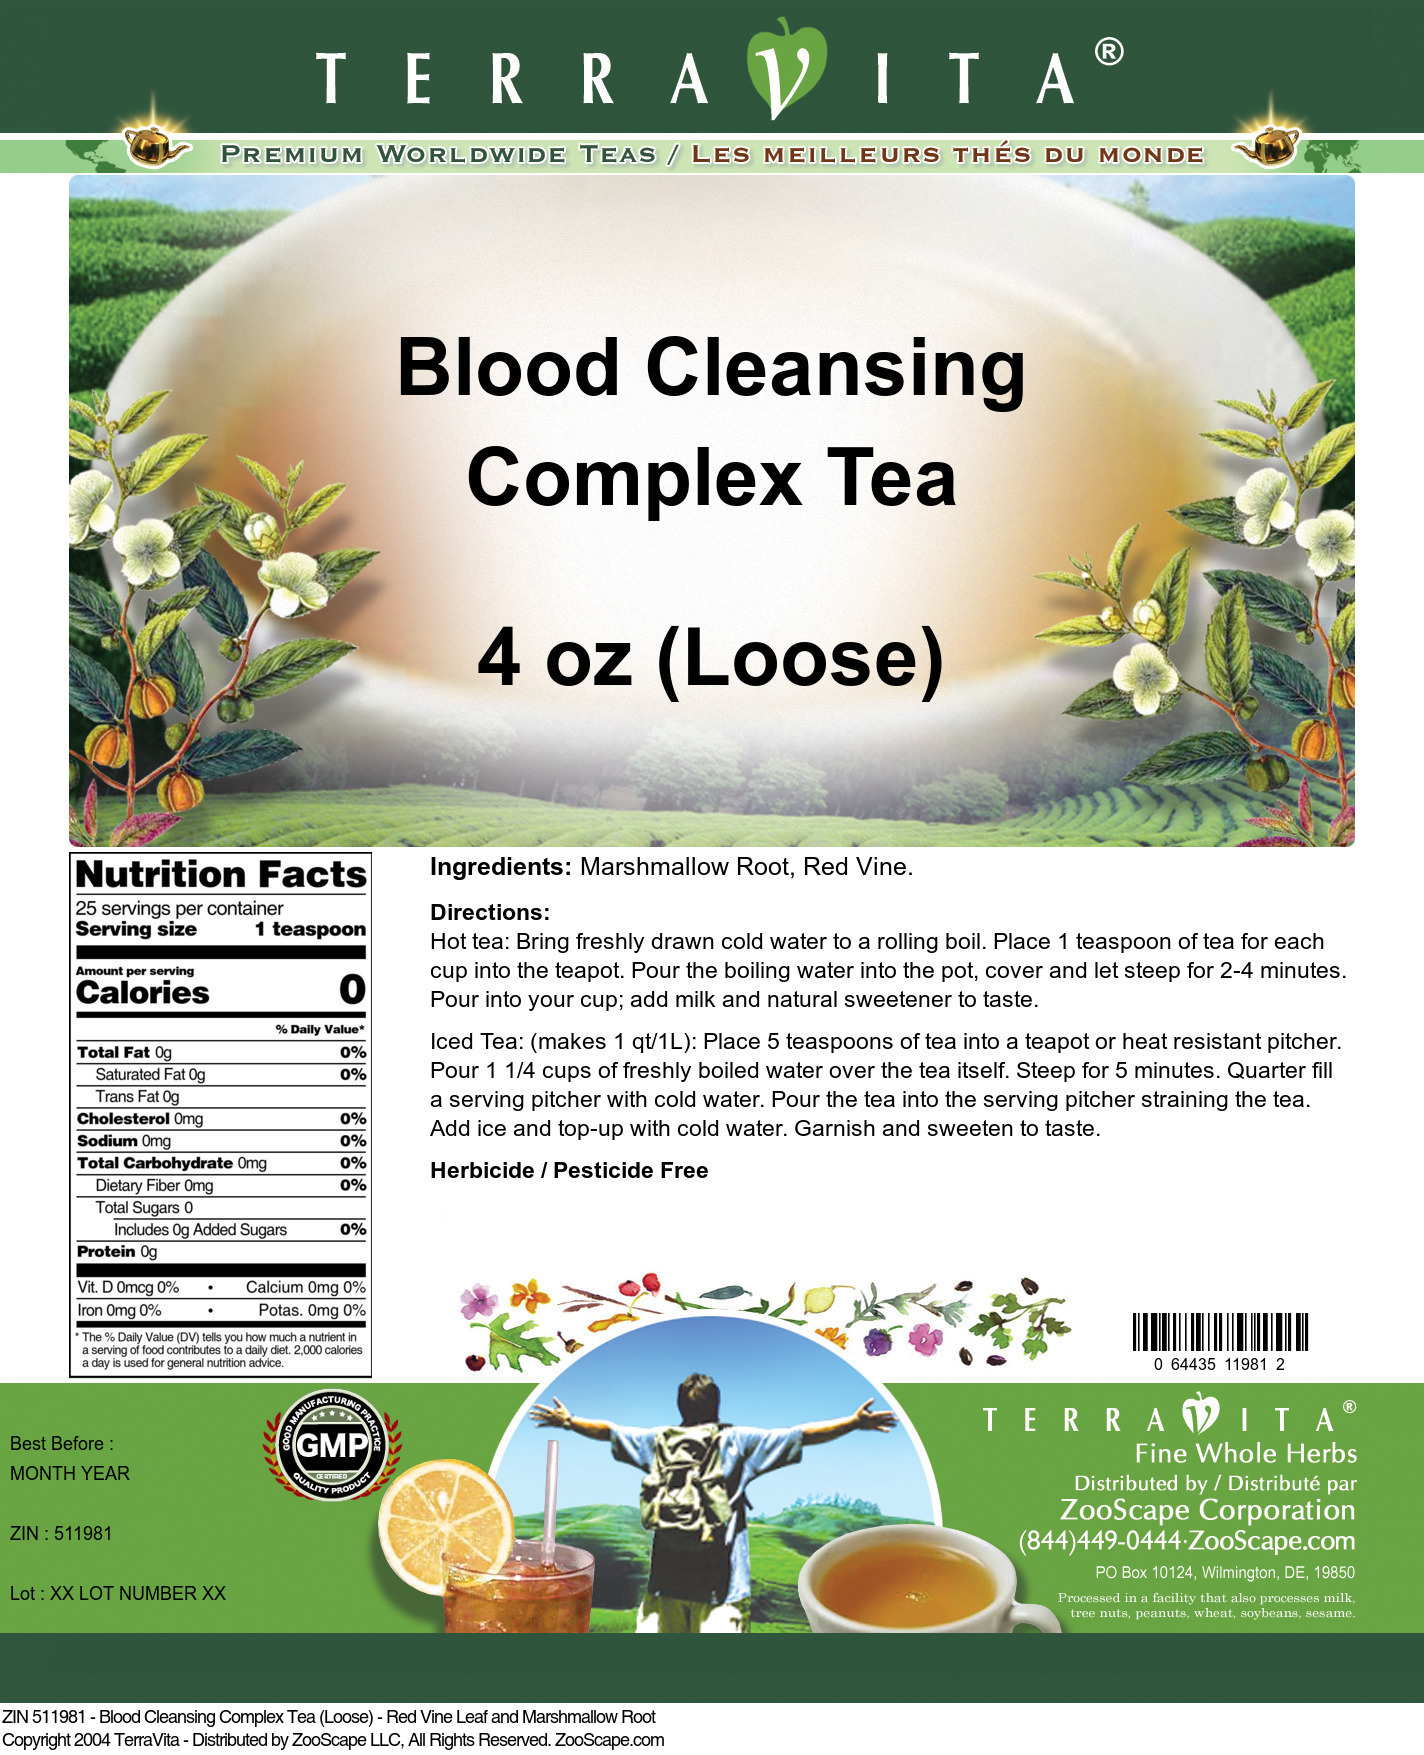 Blood Cleansing Complex Tea (Loose) - Red Vine Leaf and Marshmallow Root - Label